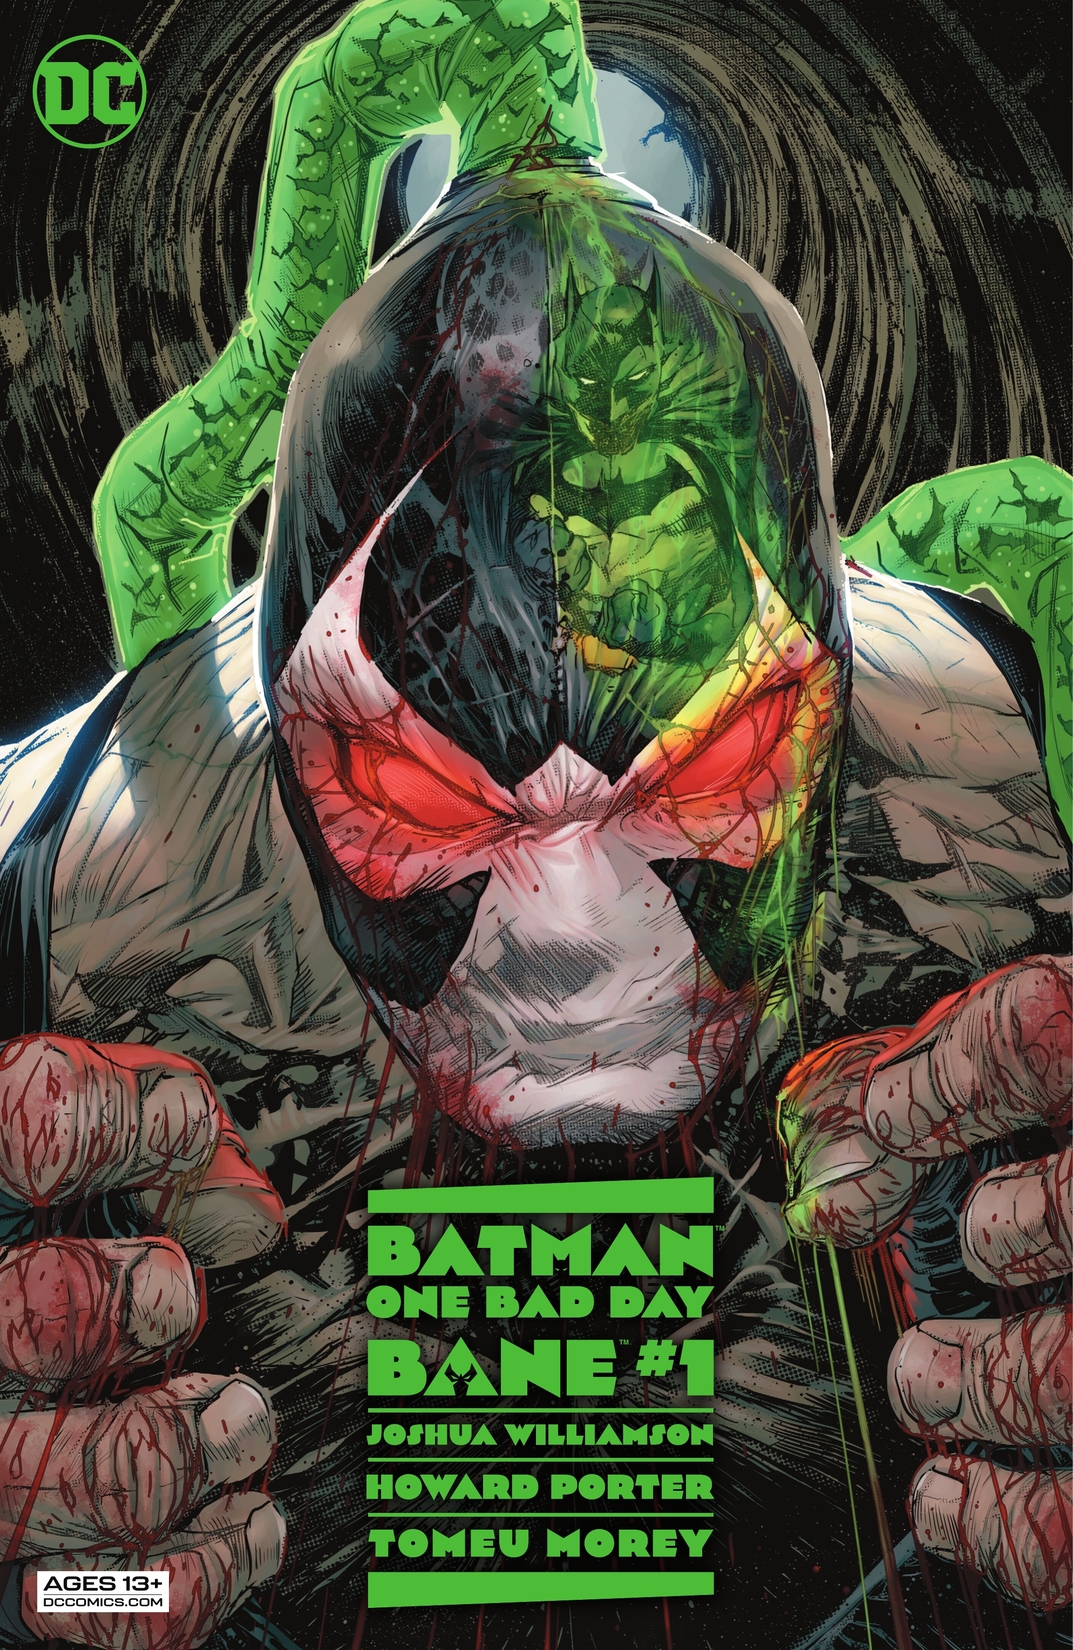 Batman - One Bad Day: Bane #1 preview images